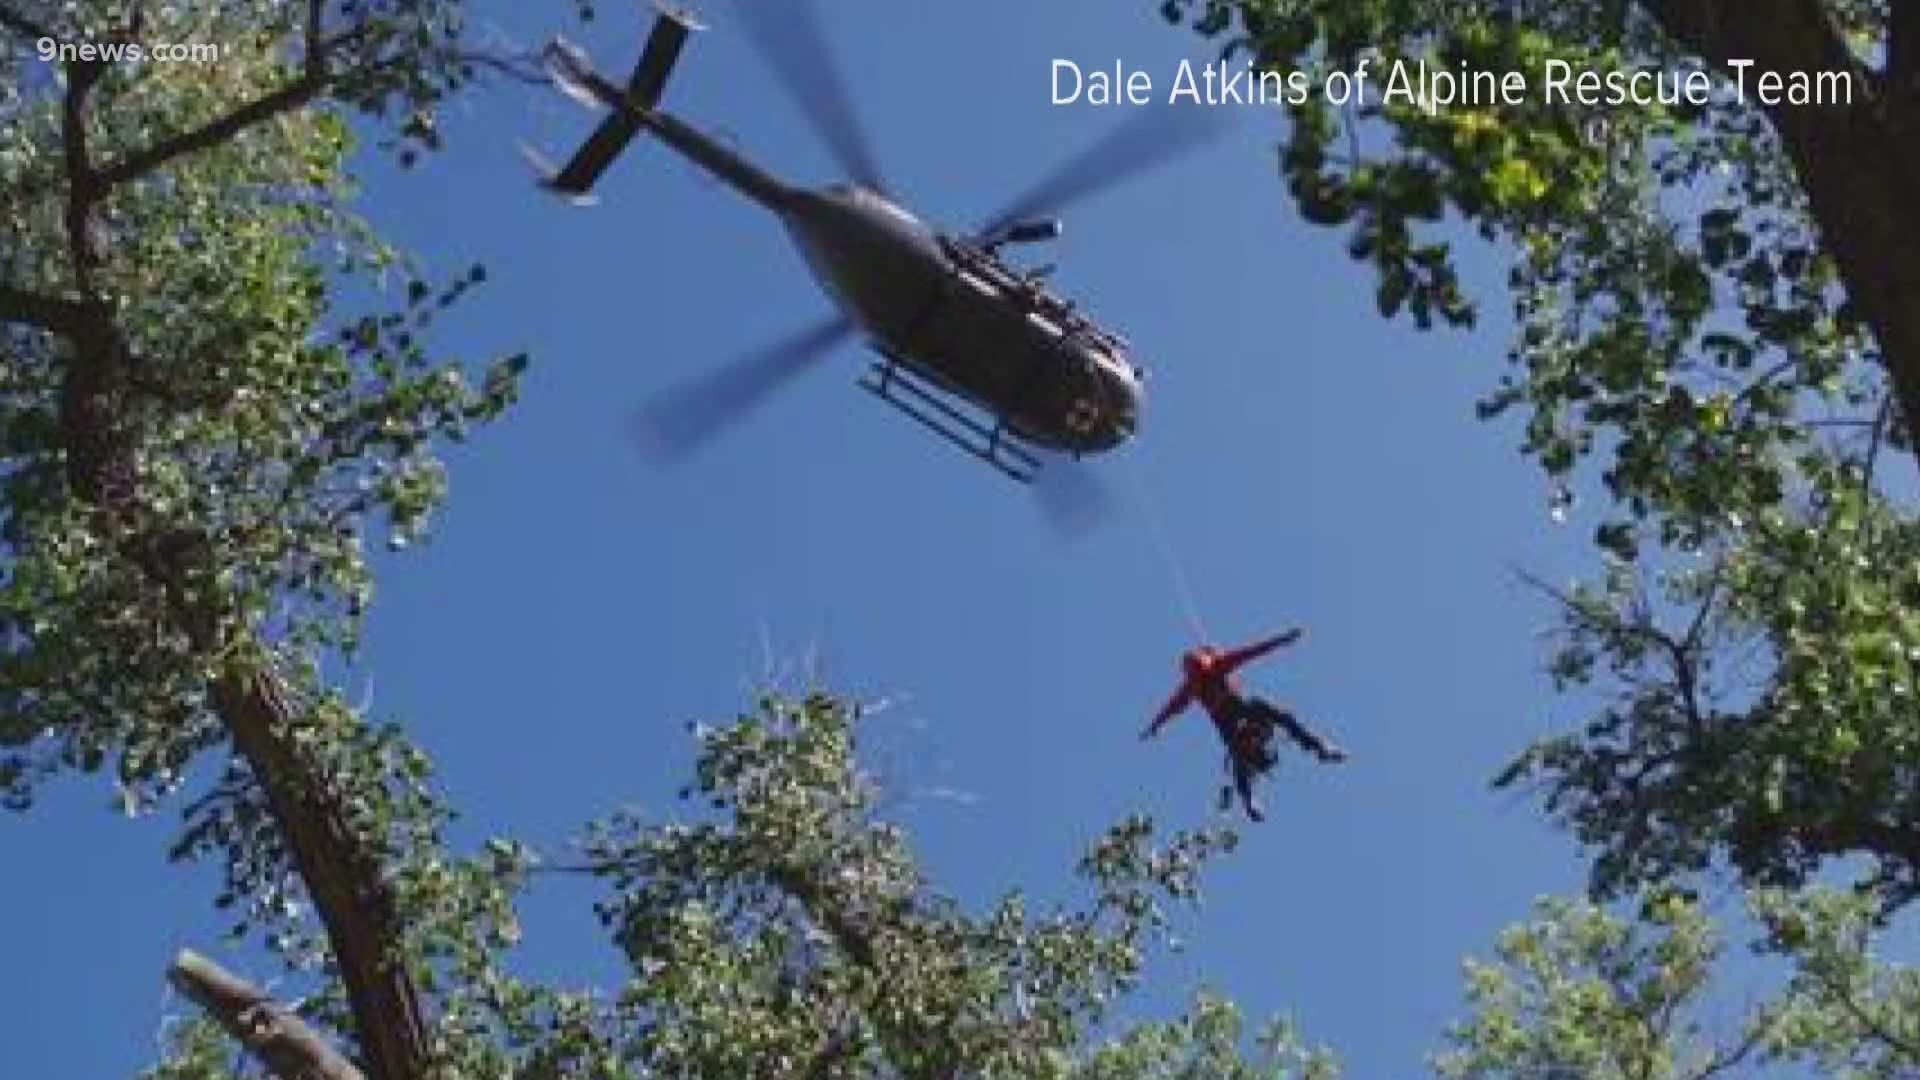 Colton McDonald was rescued by helicopter after he was trapped by fire while on a 10-day solo backpacking trip.